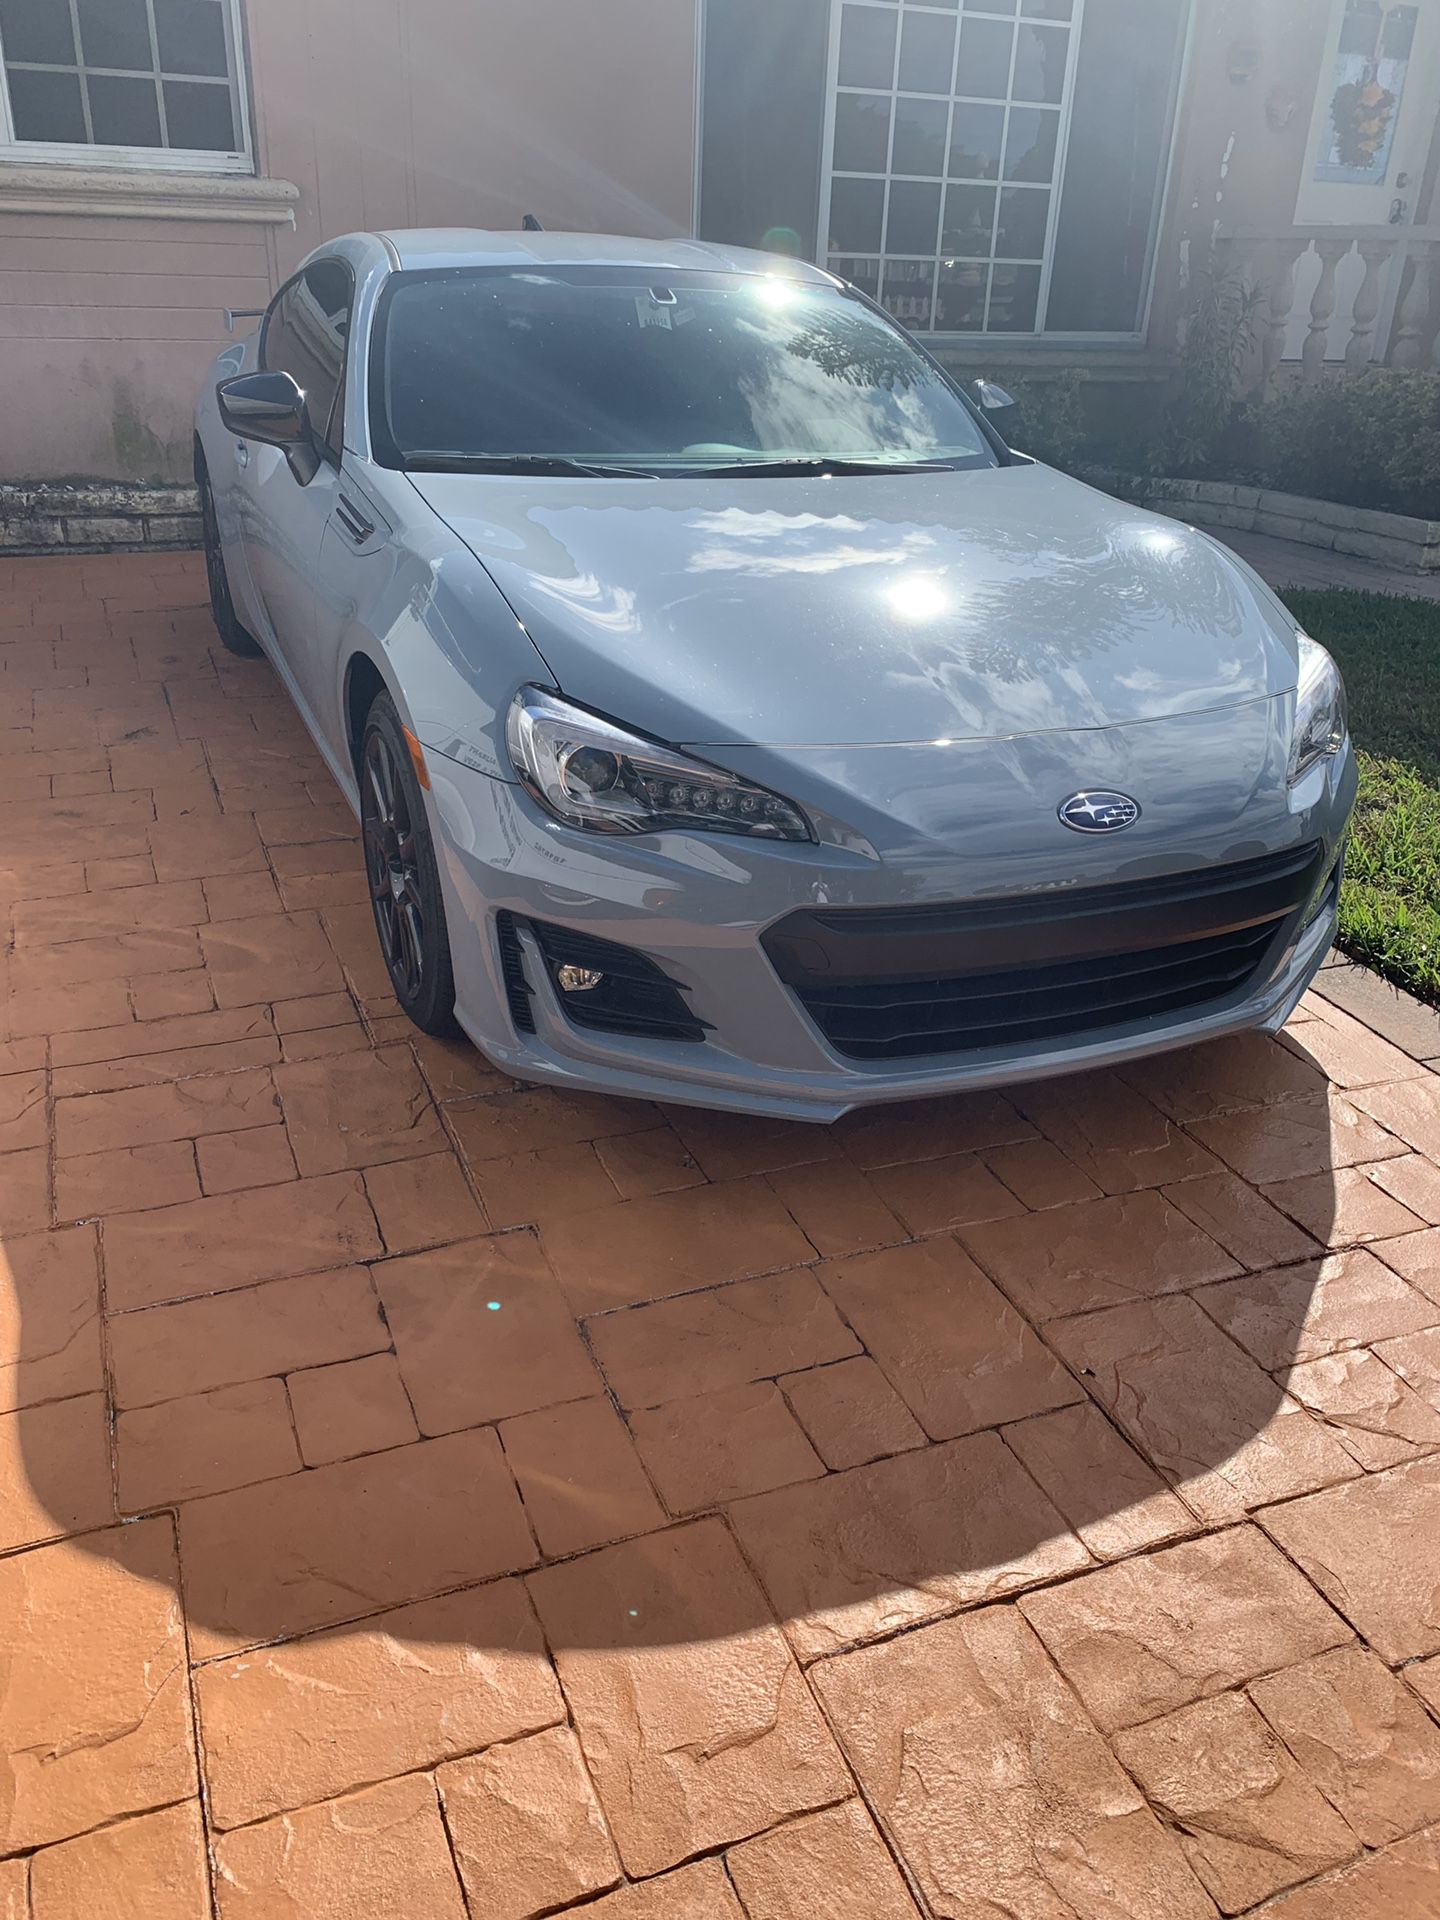 BRZ special edition